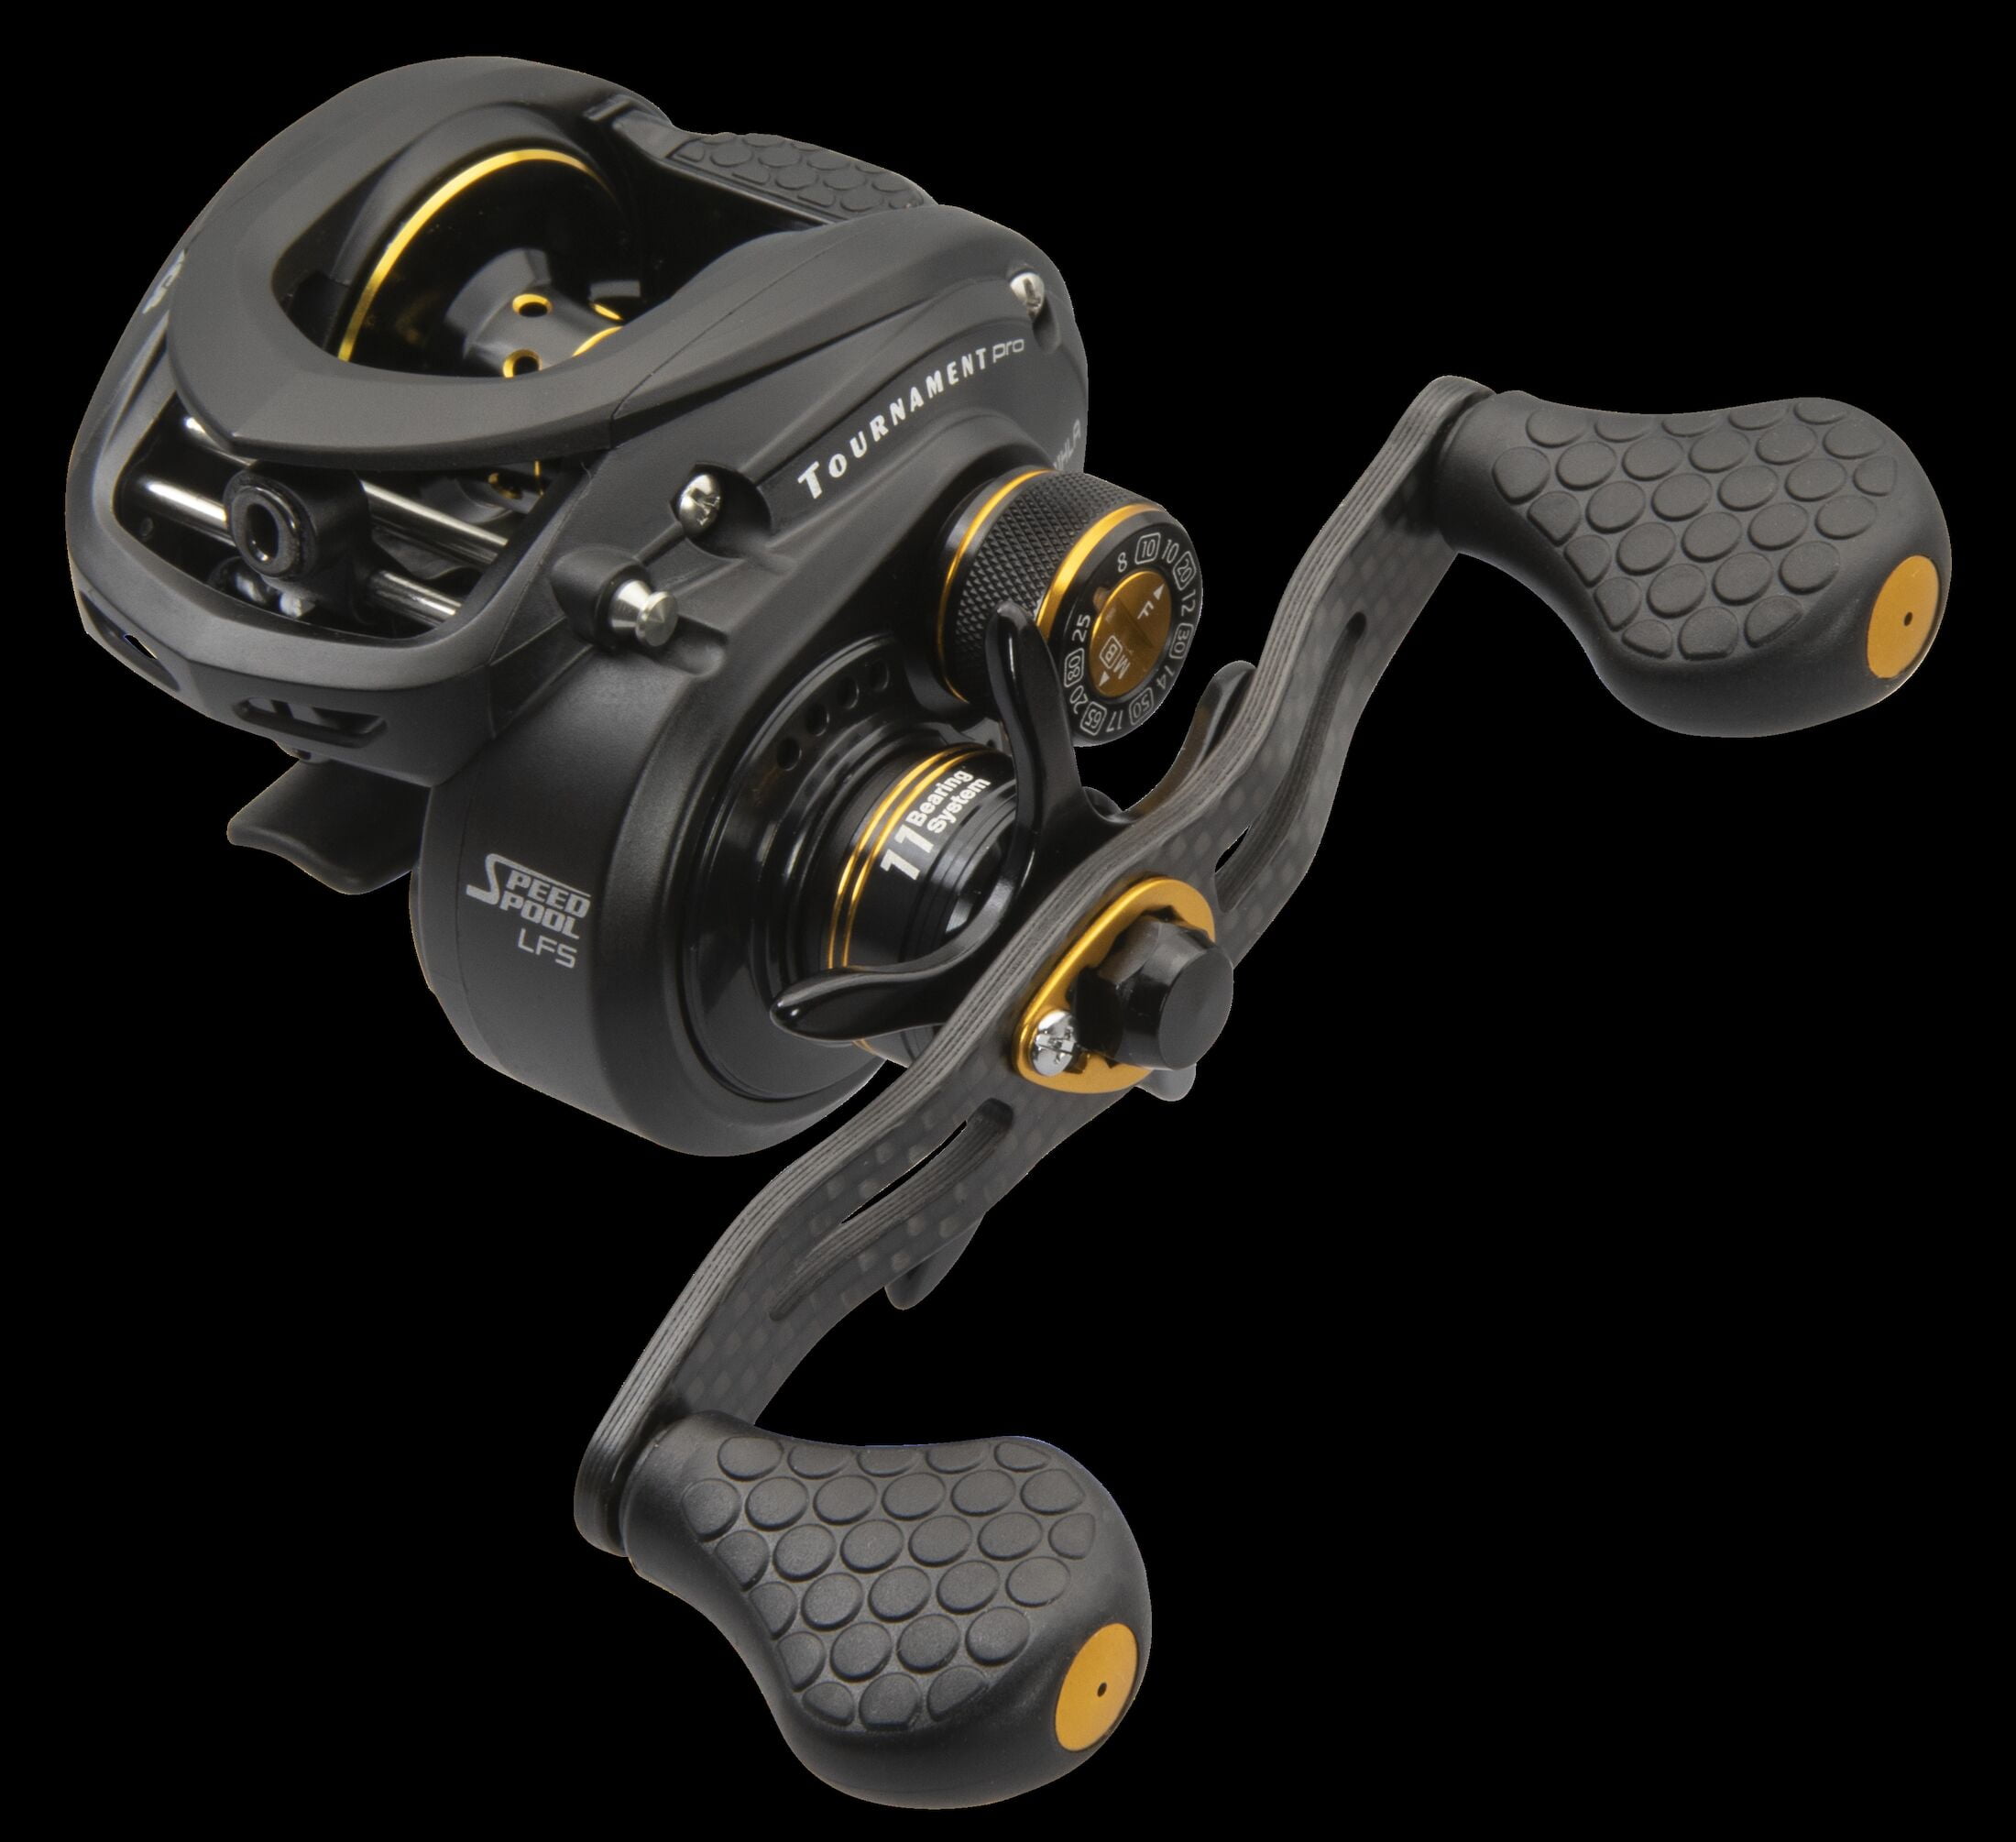 Lew's Tournament Pro LFS Speed Spool Baitcast Fishing Reel, Left-Hand  Retrieve, 7.5:1 Gear Ratio, 11 Bearing System with Stainless Steel Double